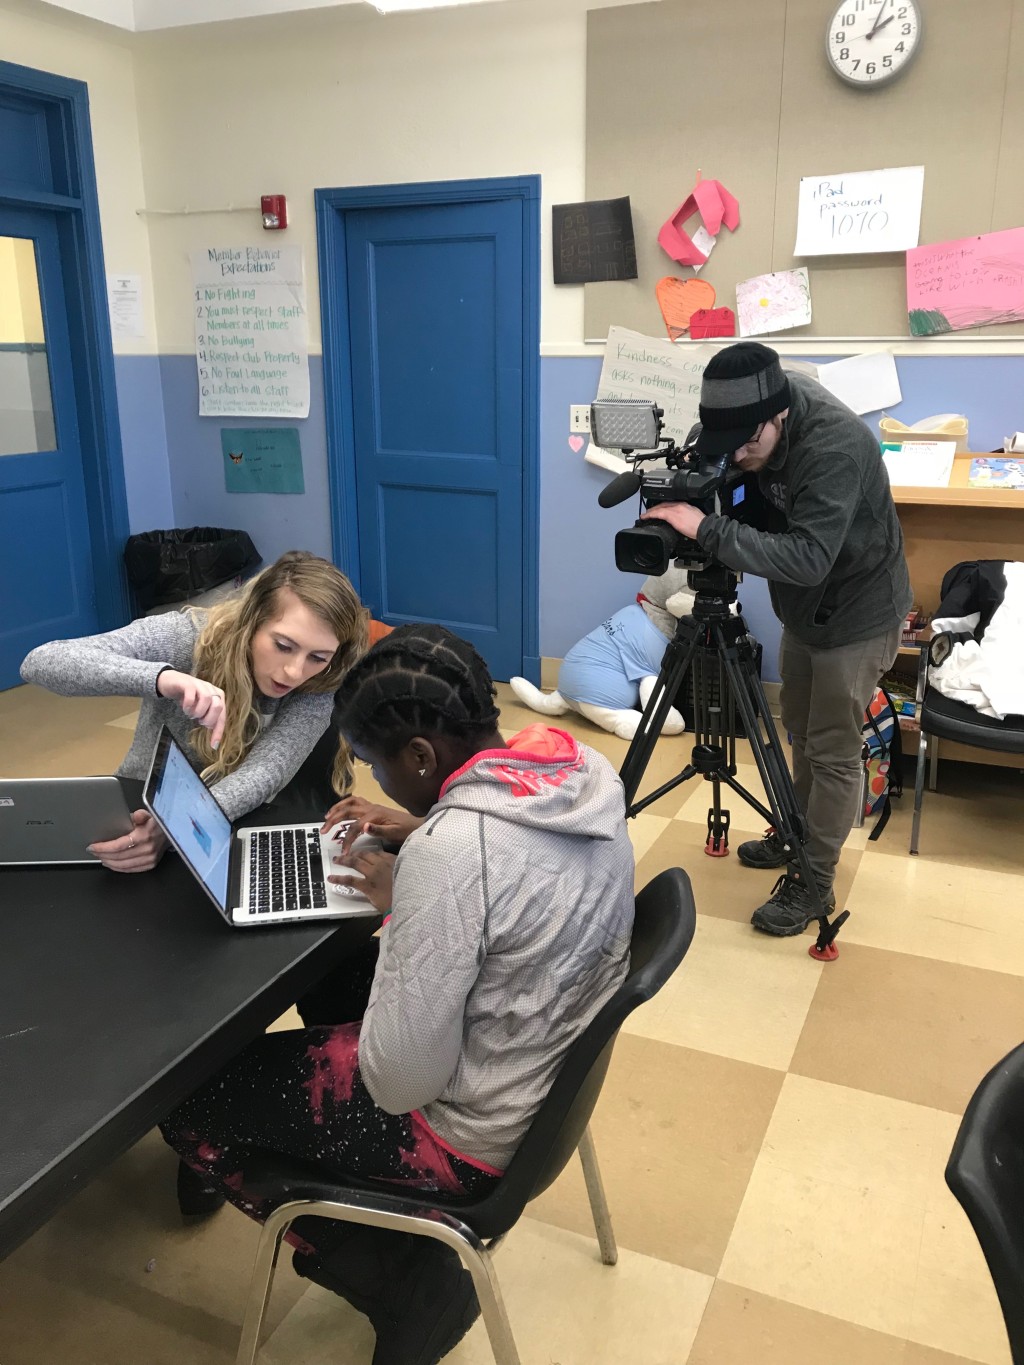 A WGME videographer captures Paige Hibbard assisting a student for a segment in the evening news